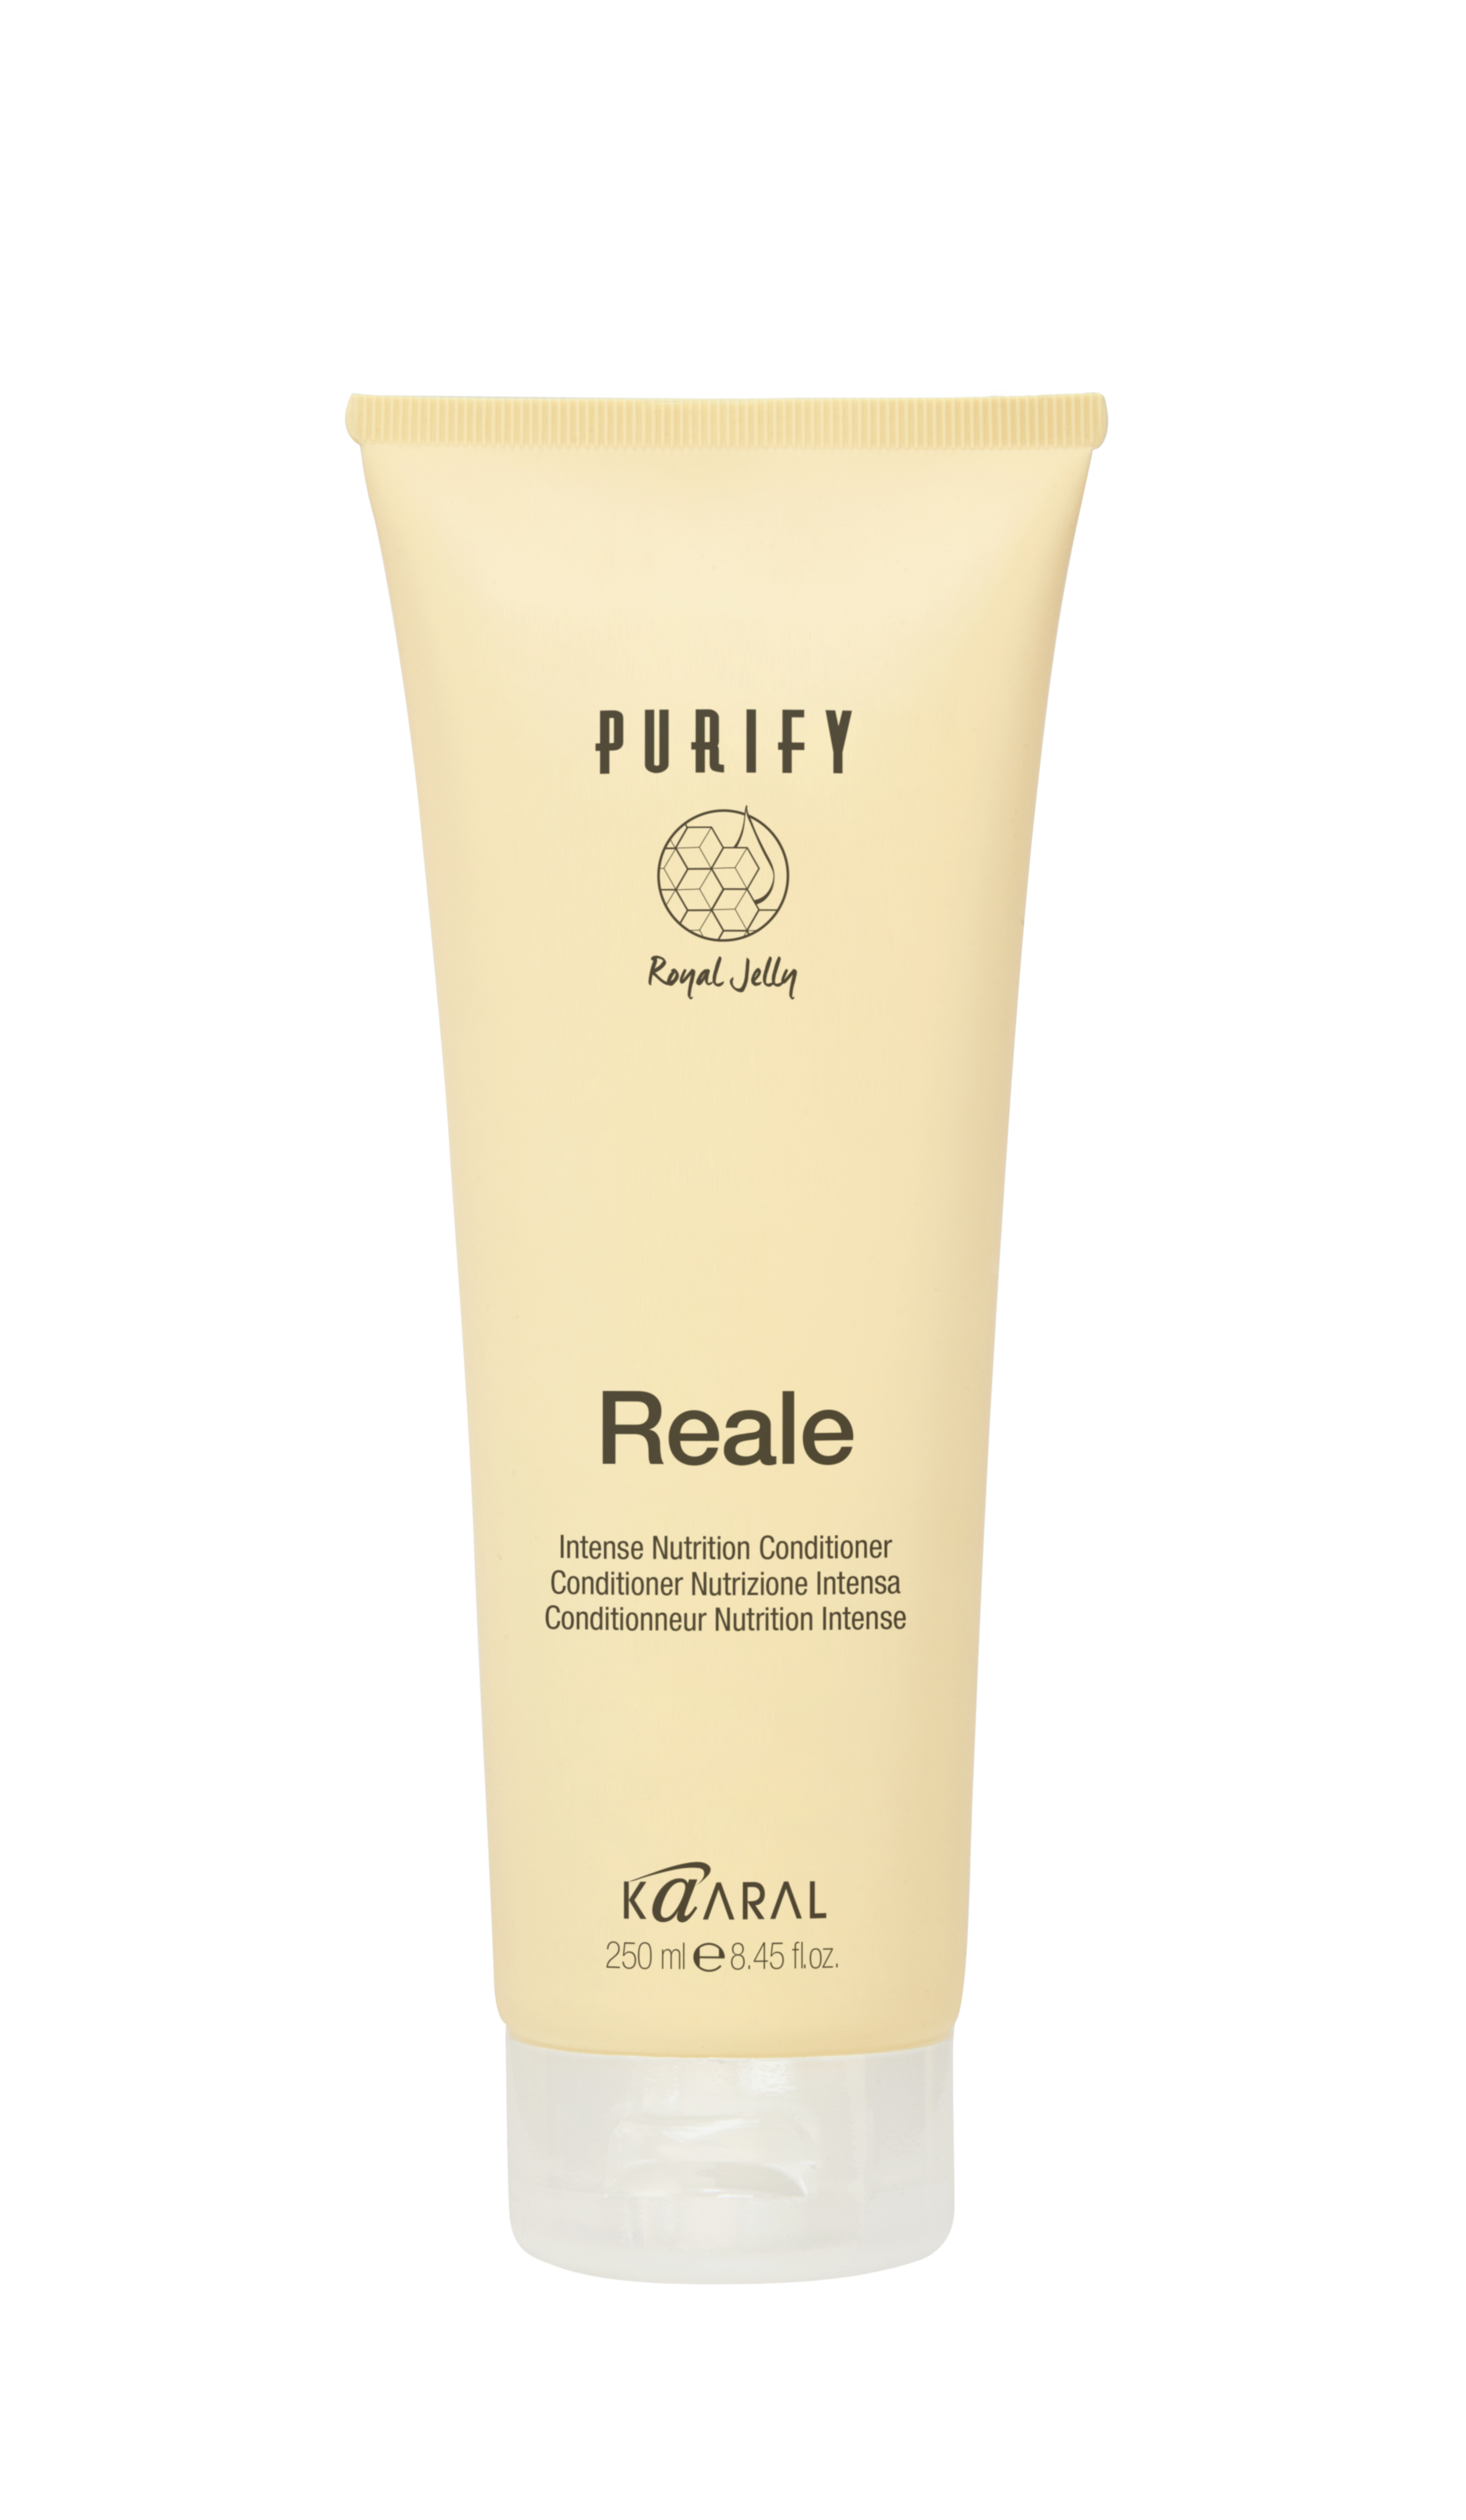 PURIFY Reale Conditioner by KAARAL